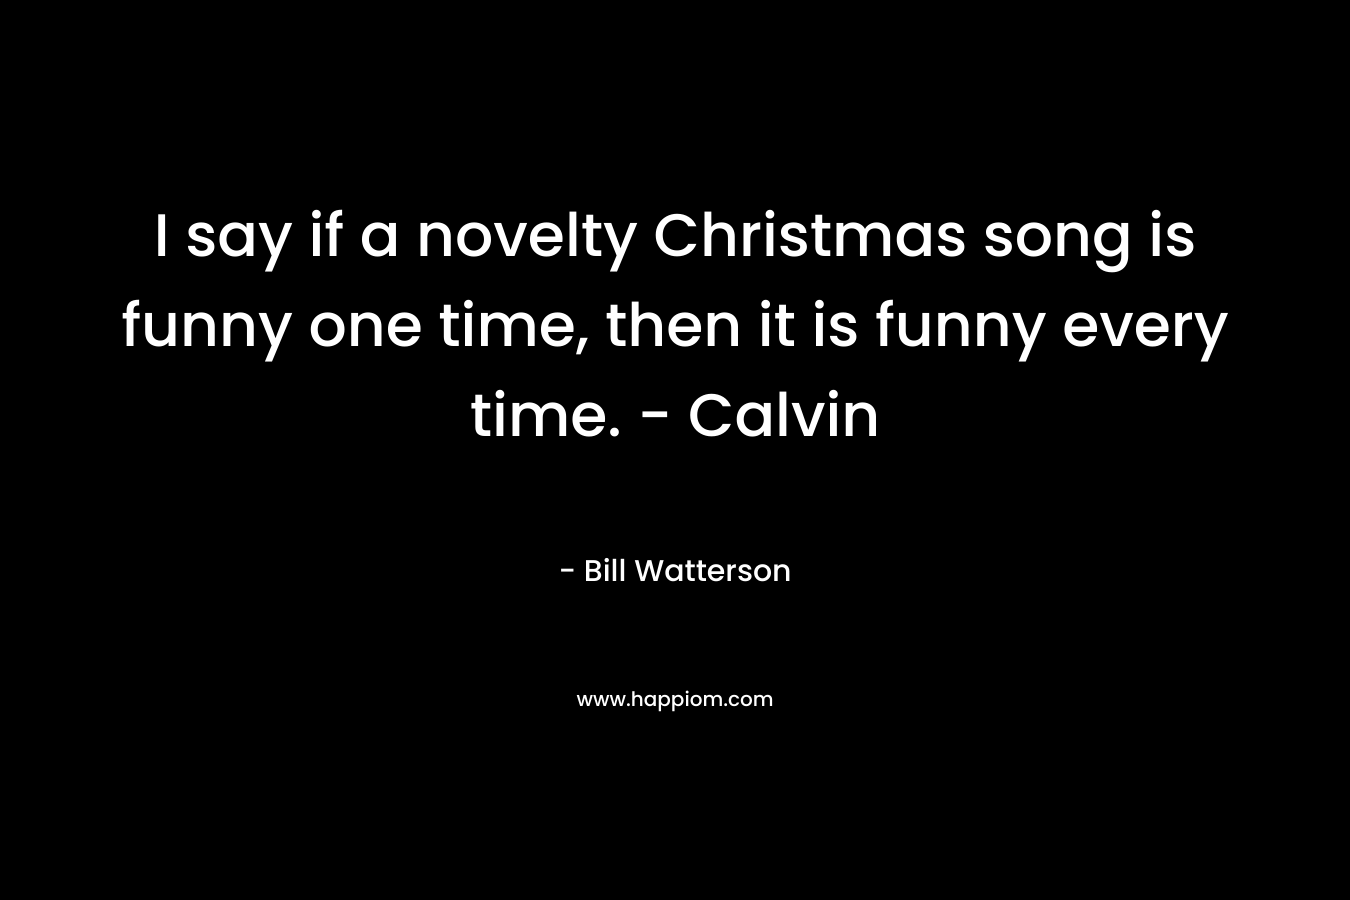 I say if a novelty Christmas song is funny one time, then it is funny every time. - Calvin